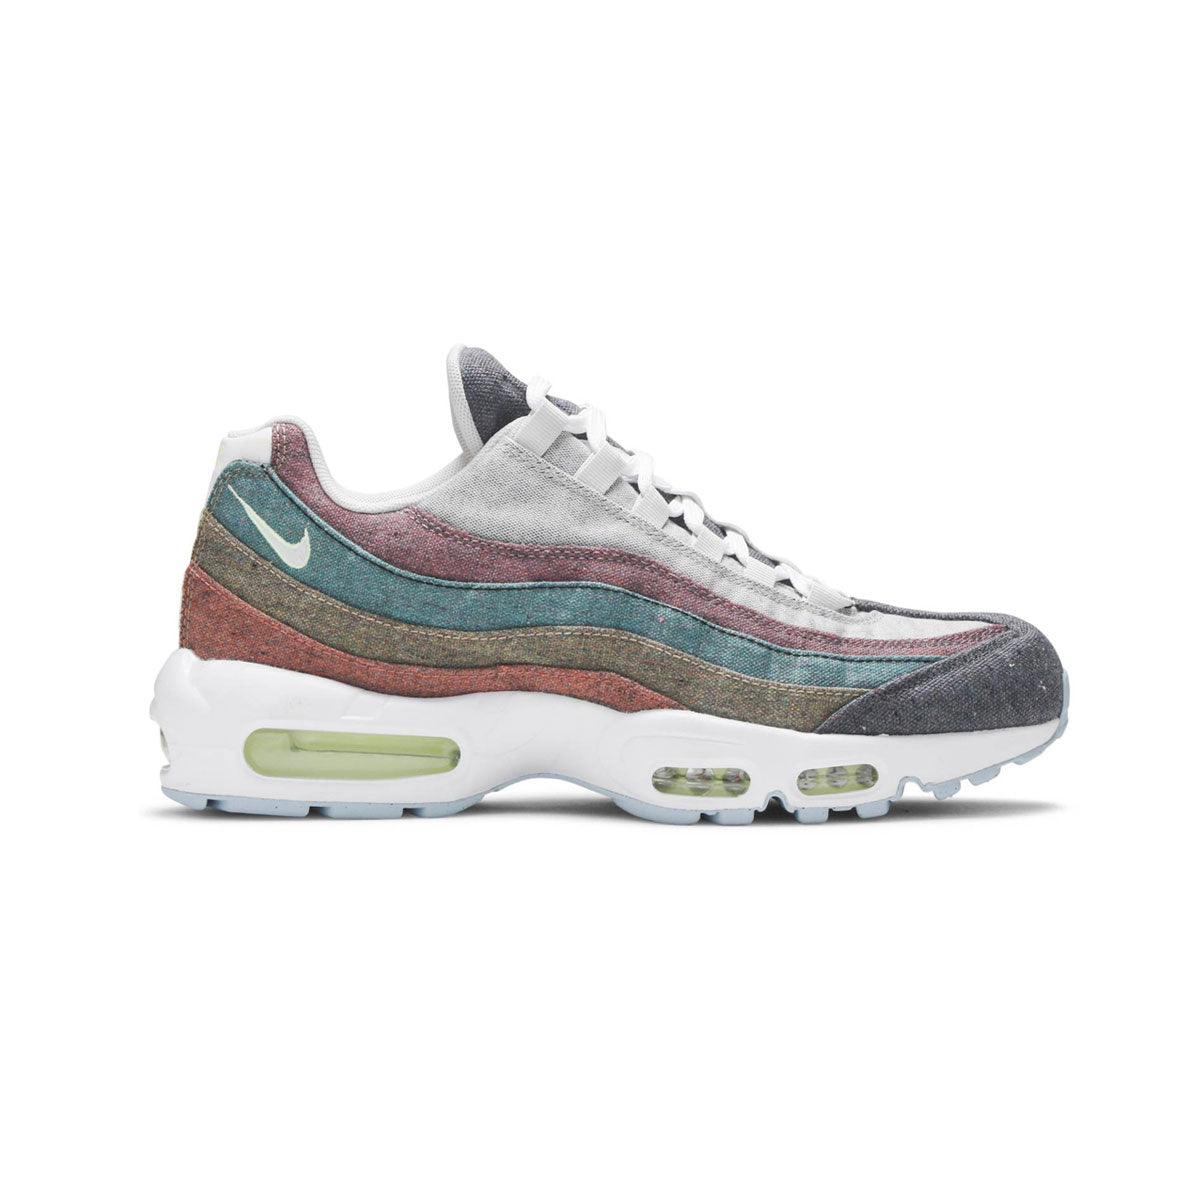 Nike Men's Air Max 95 “Recycled Canvas”